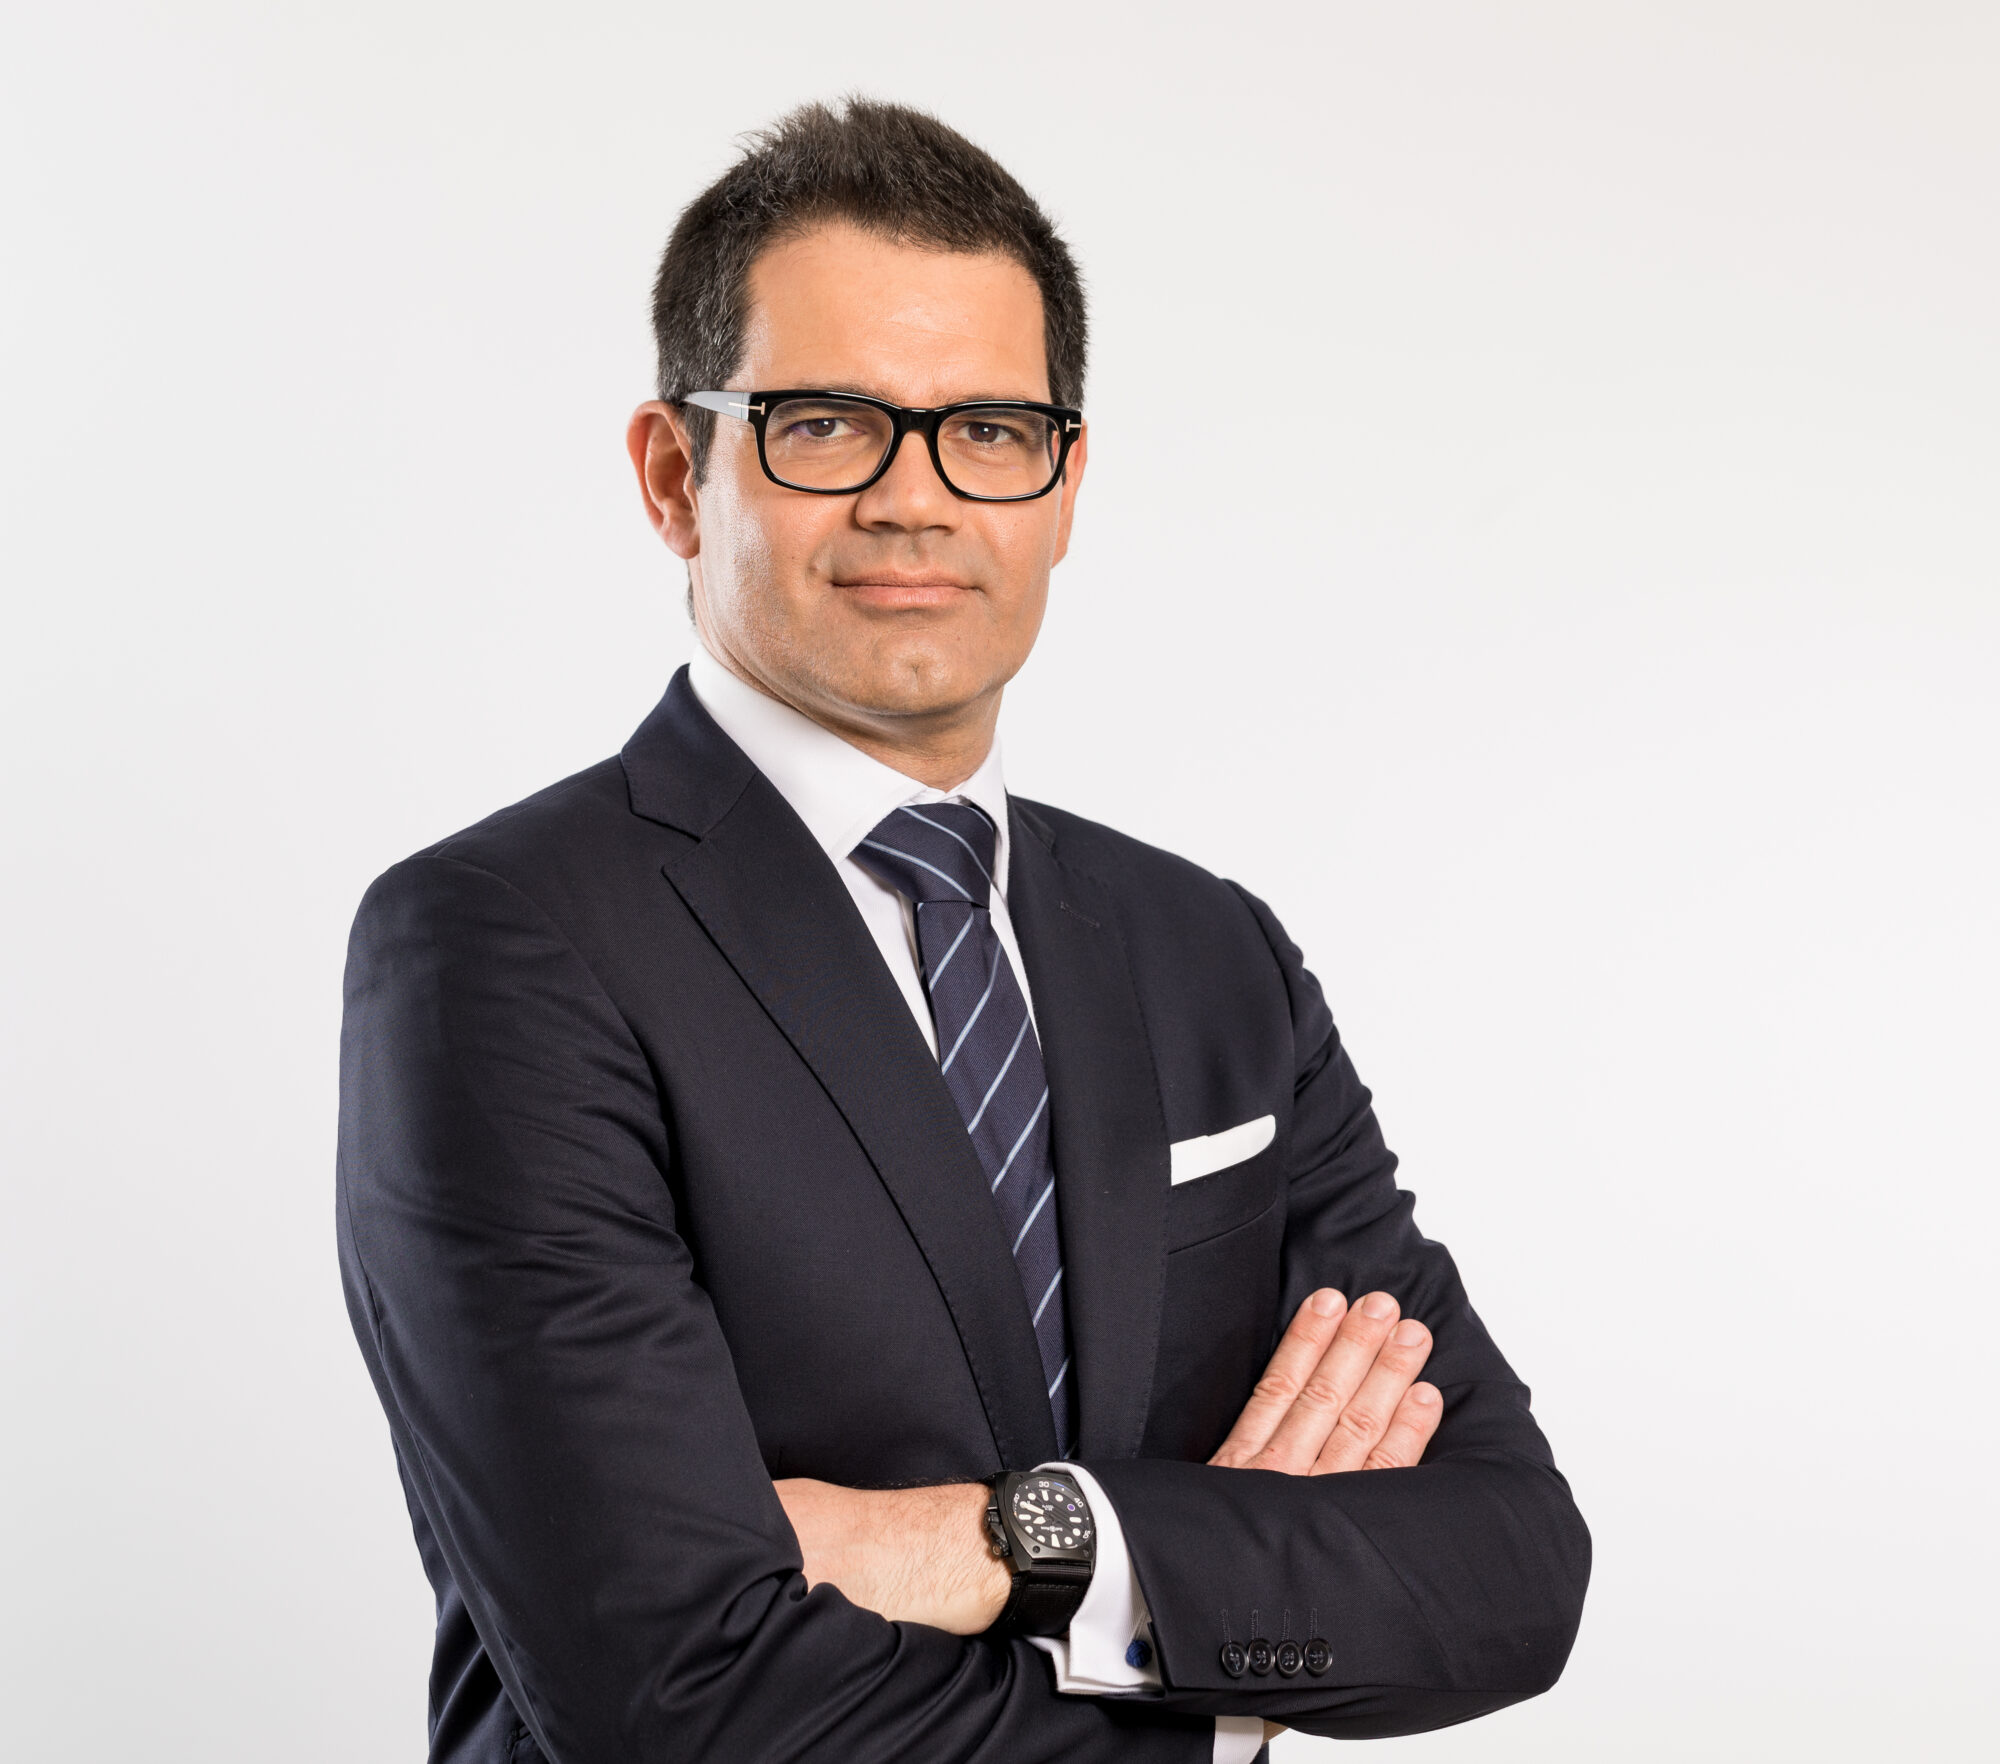 Frederic Schneider - Vice President Sales and Marketing of RCI Bank and Services